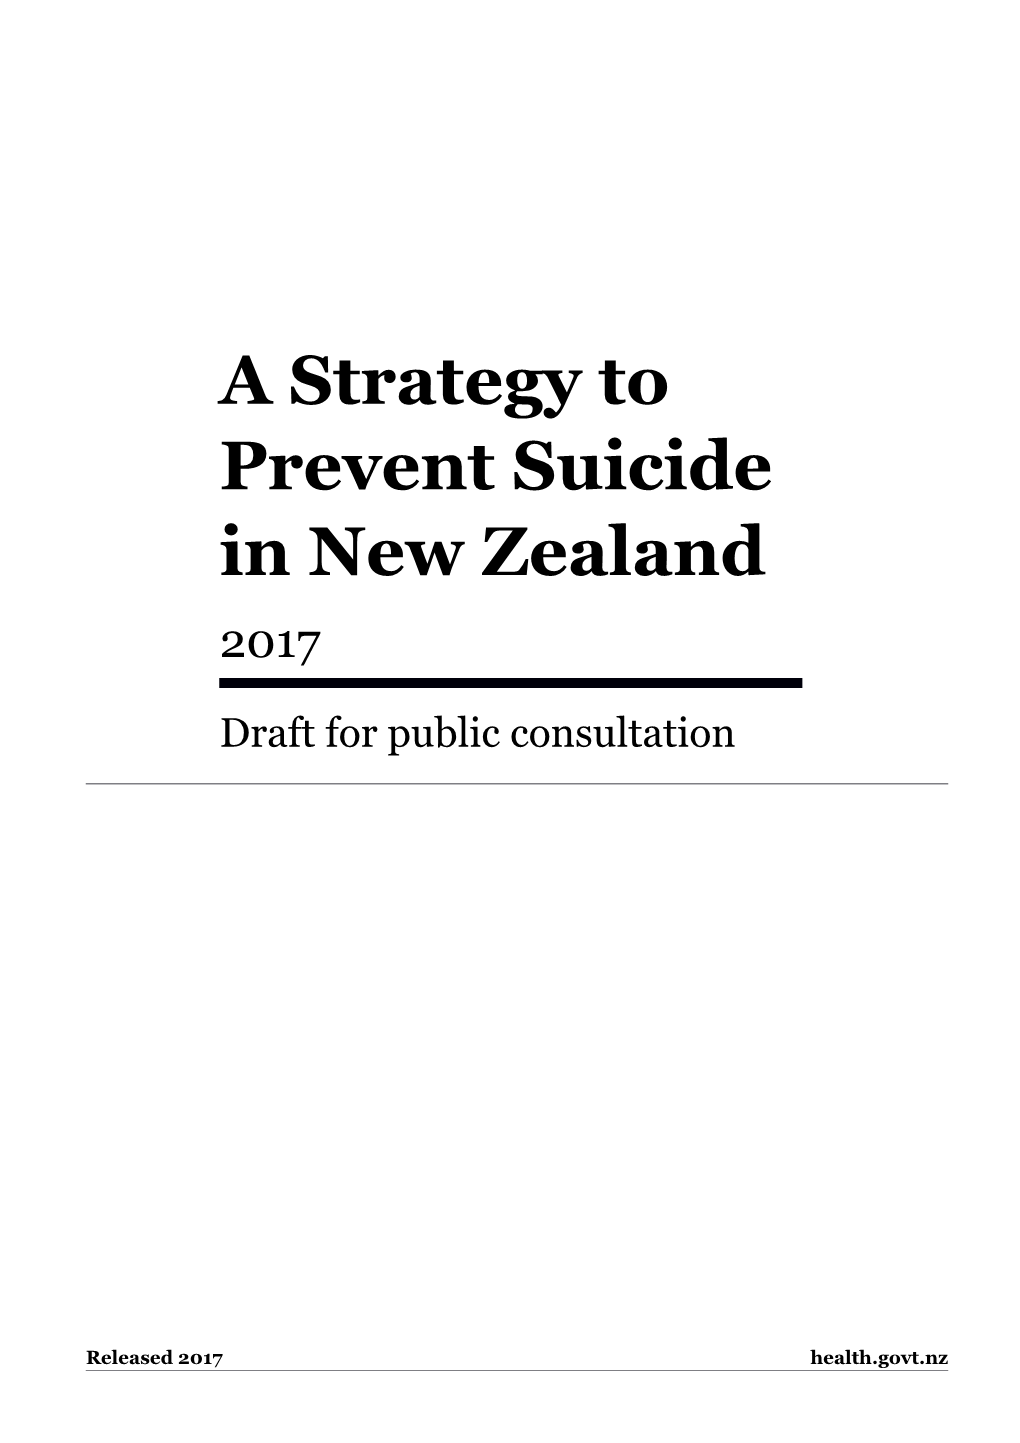 A Strategy to Prevent Suicide in New Zealand: Draft for Public Consultation